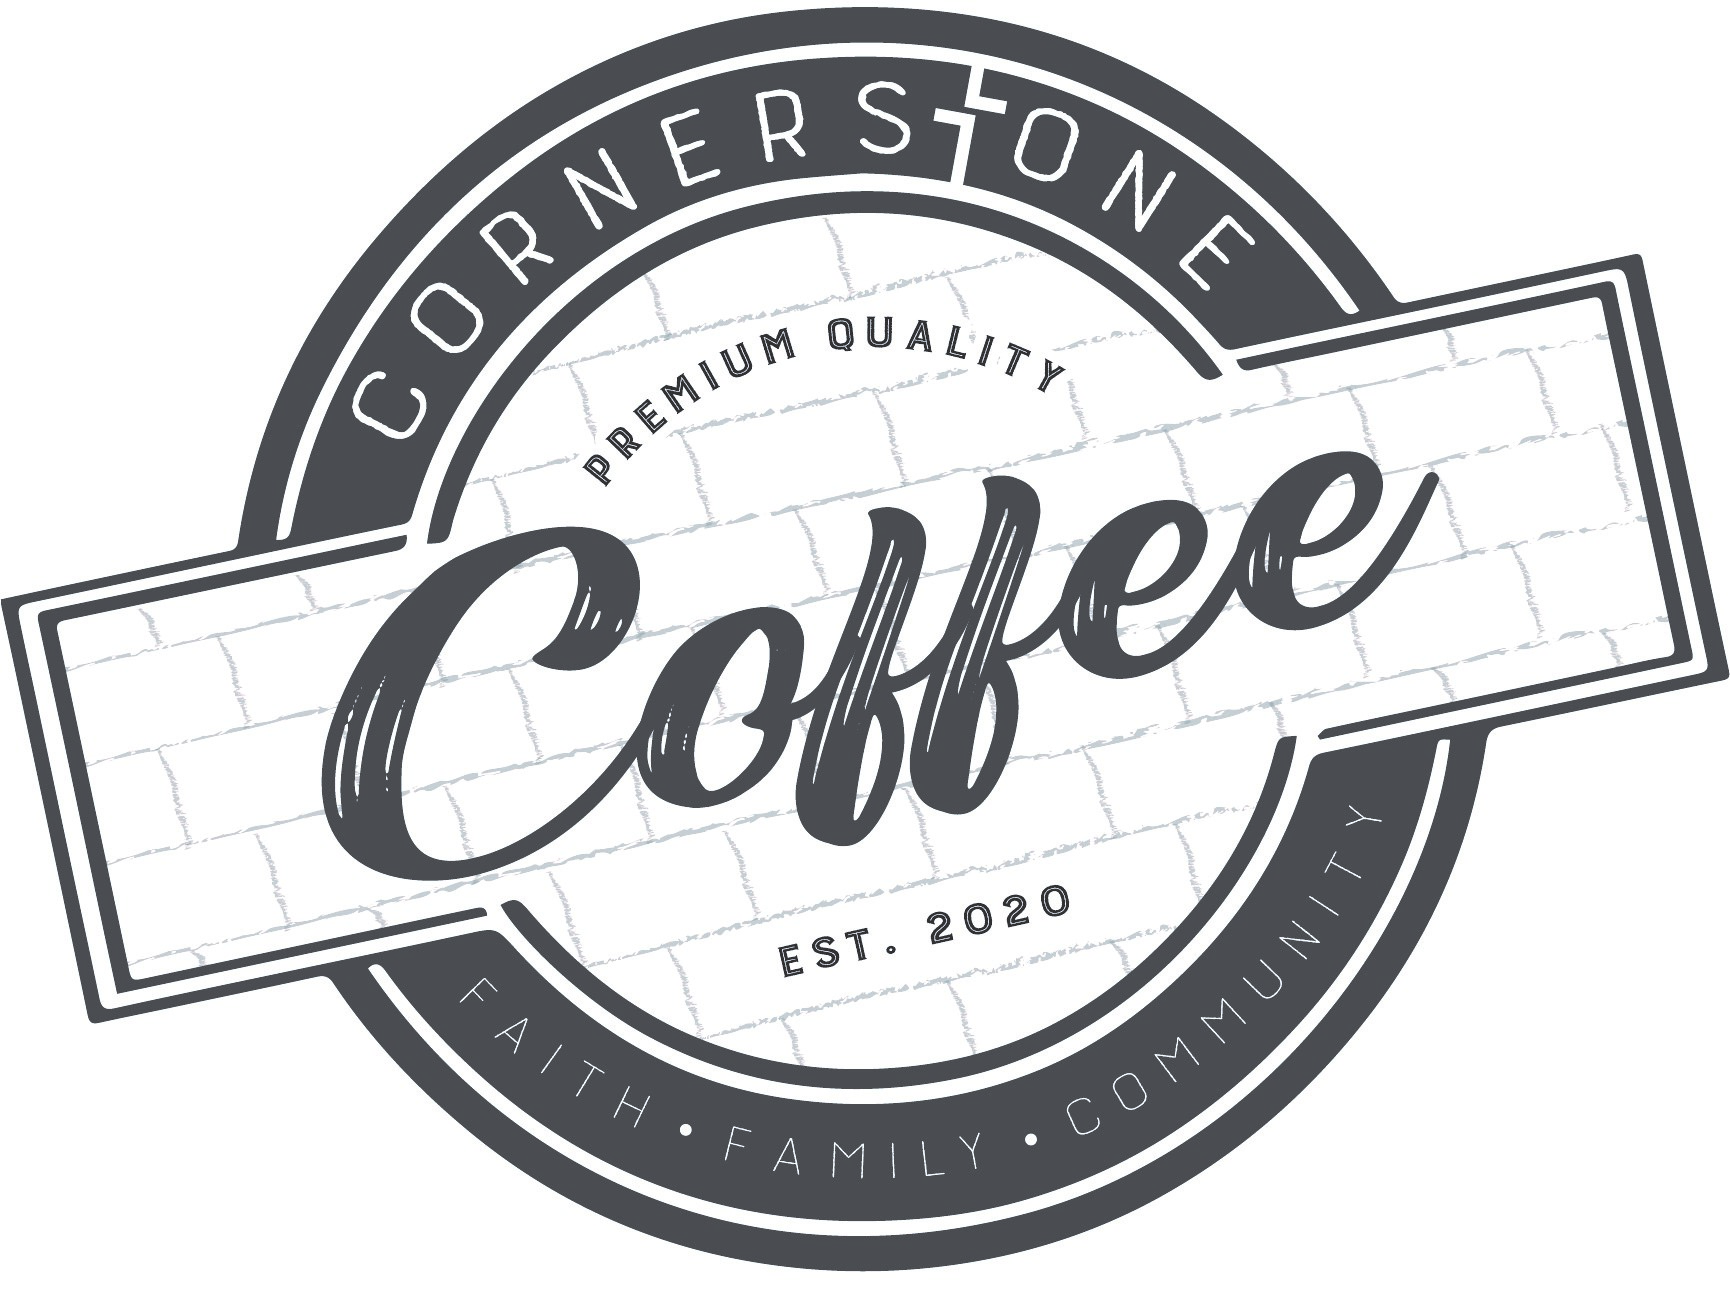 Leeah Shipley Connects People and Community Through Cornerstone Coffee